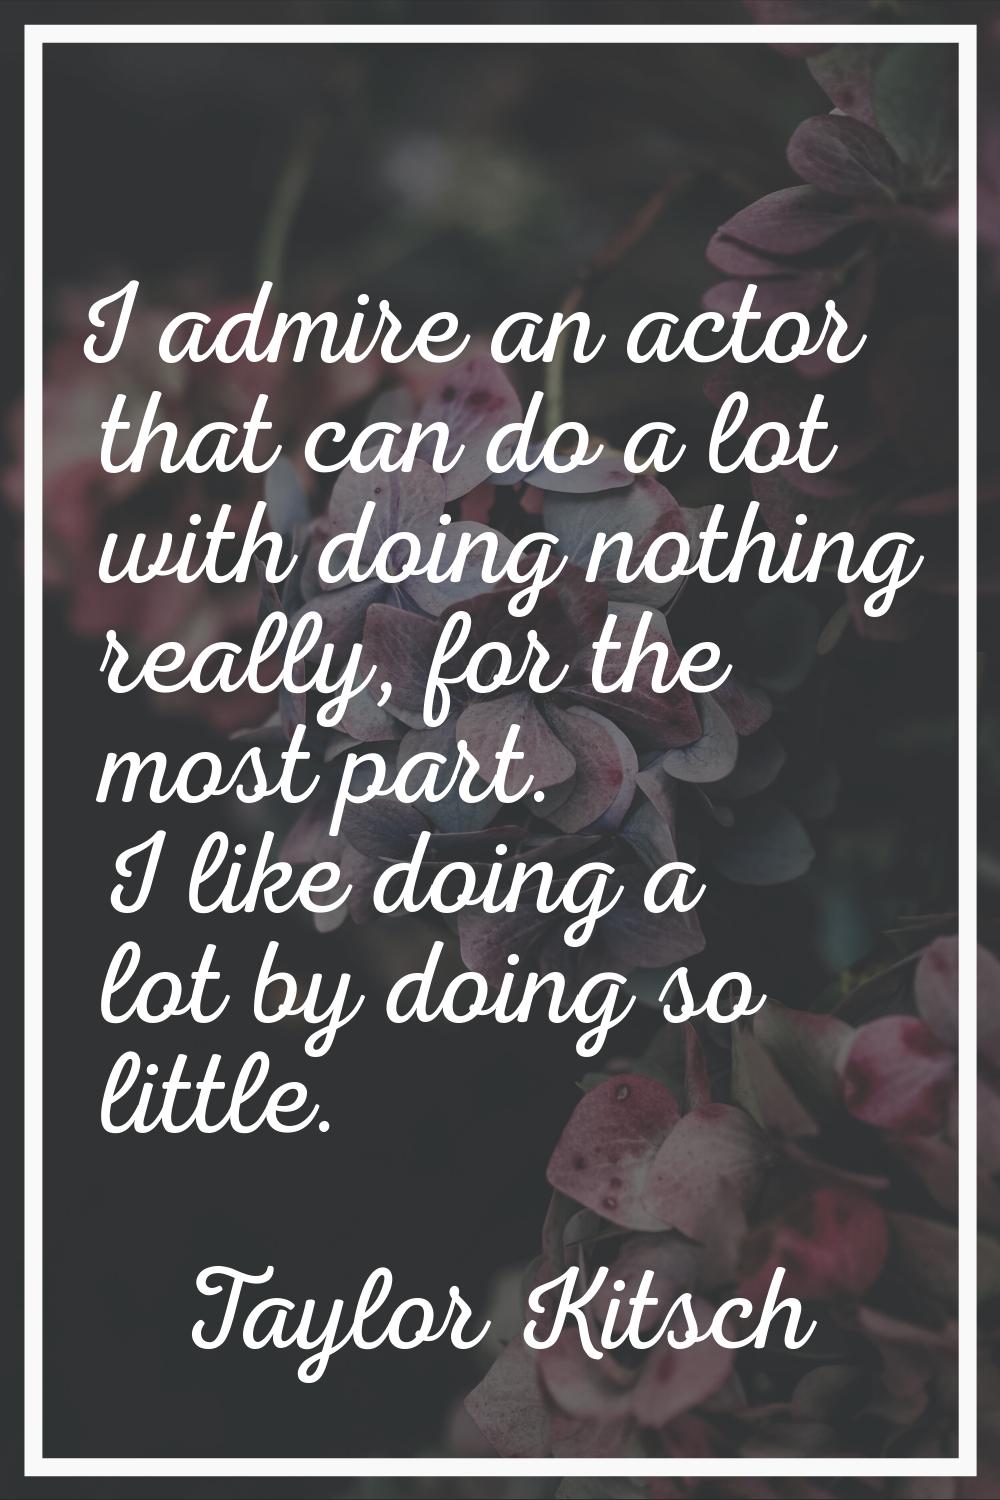 I admire an actor that can do a lot with doing nothing really, for the most part. I like doing a lo